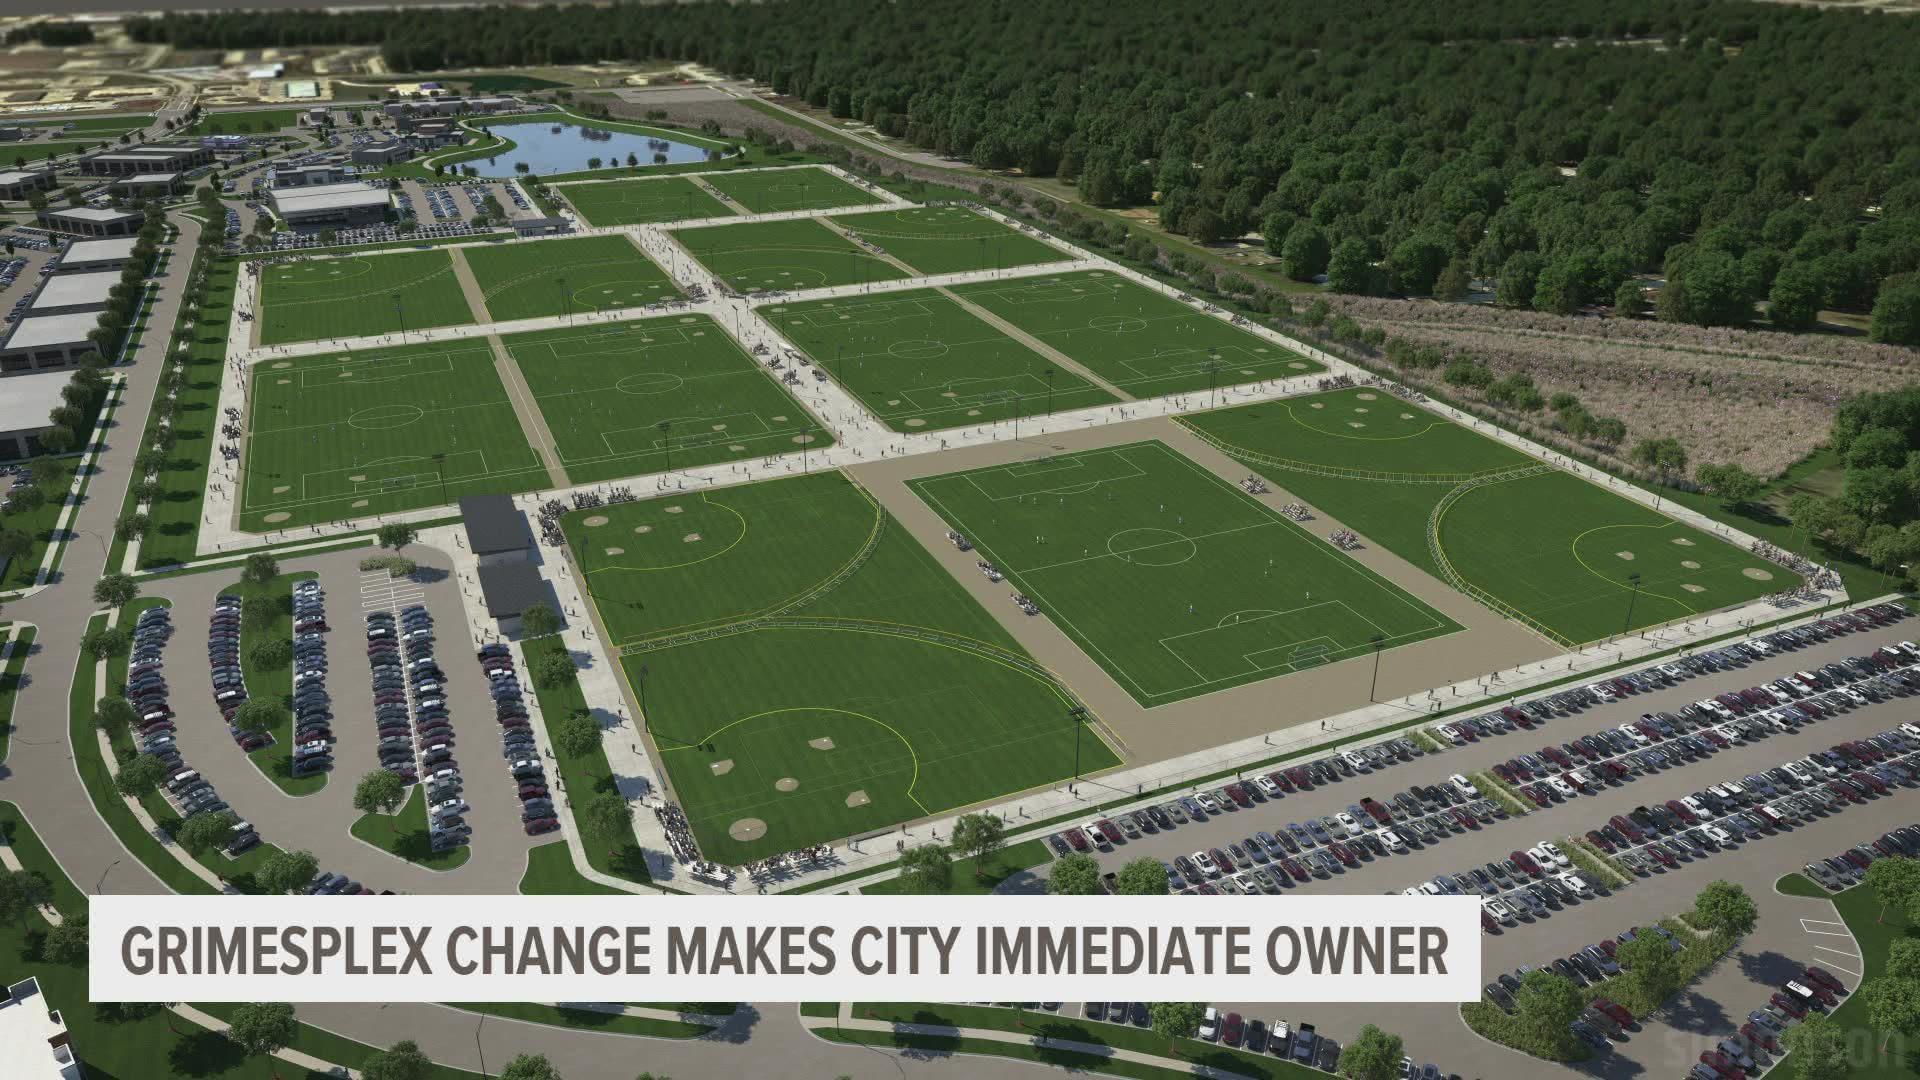 While the project continues to move forward, the Grimes City Council considered changes to the ownership of the project once it's completed.